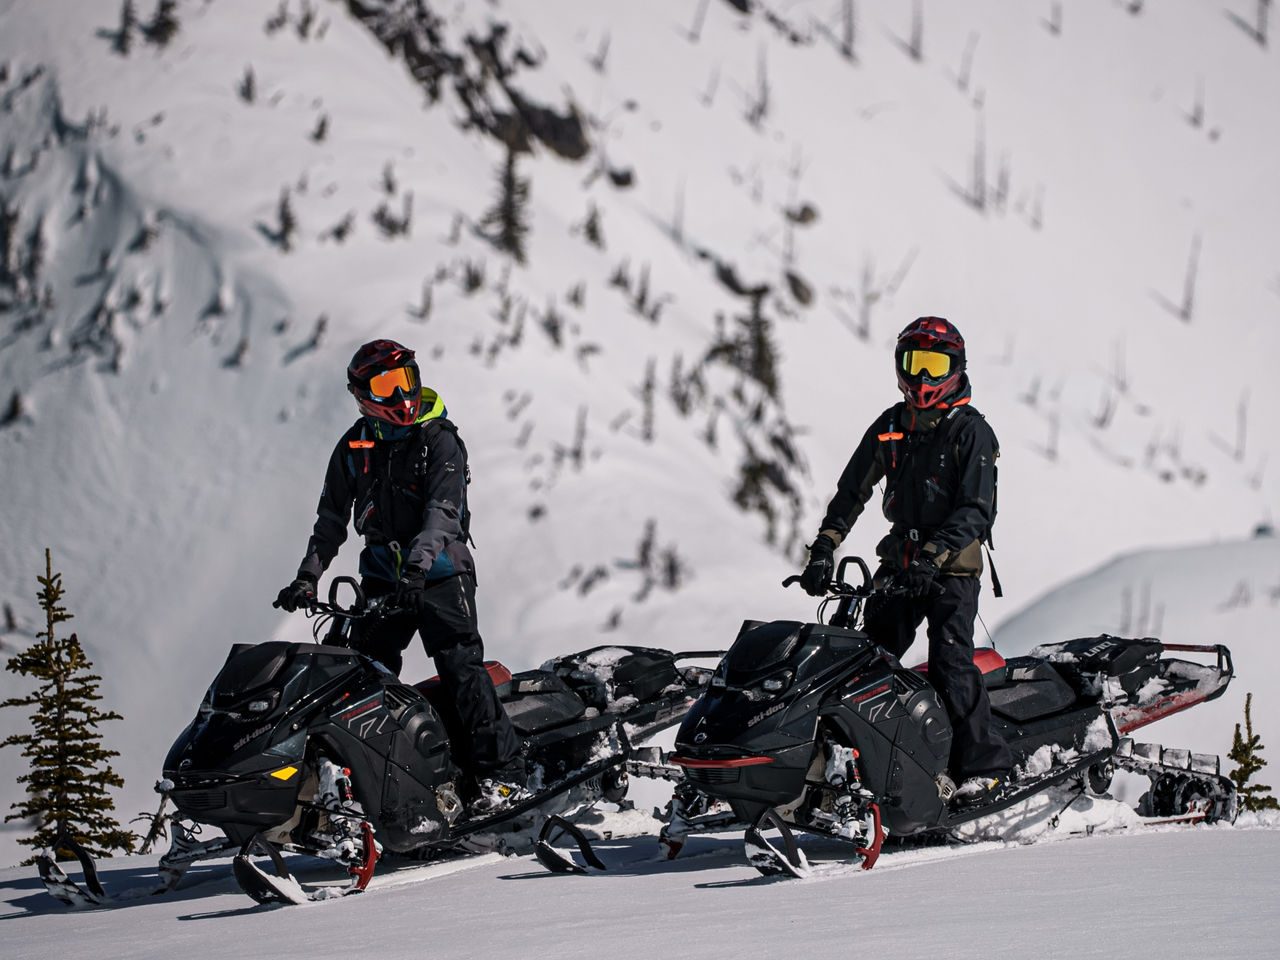 A full 5 days and nights of Ski-Doo mountain fun in Sicamous, BC